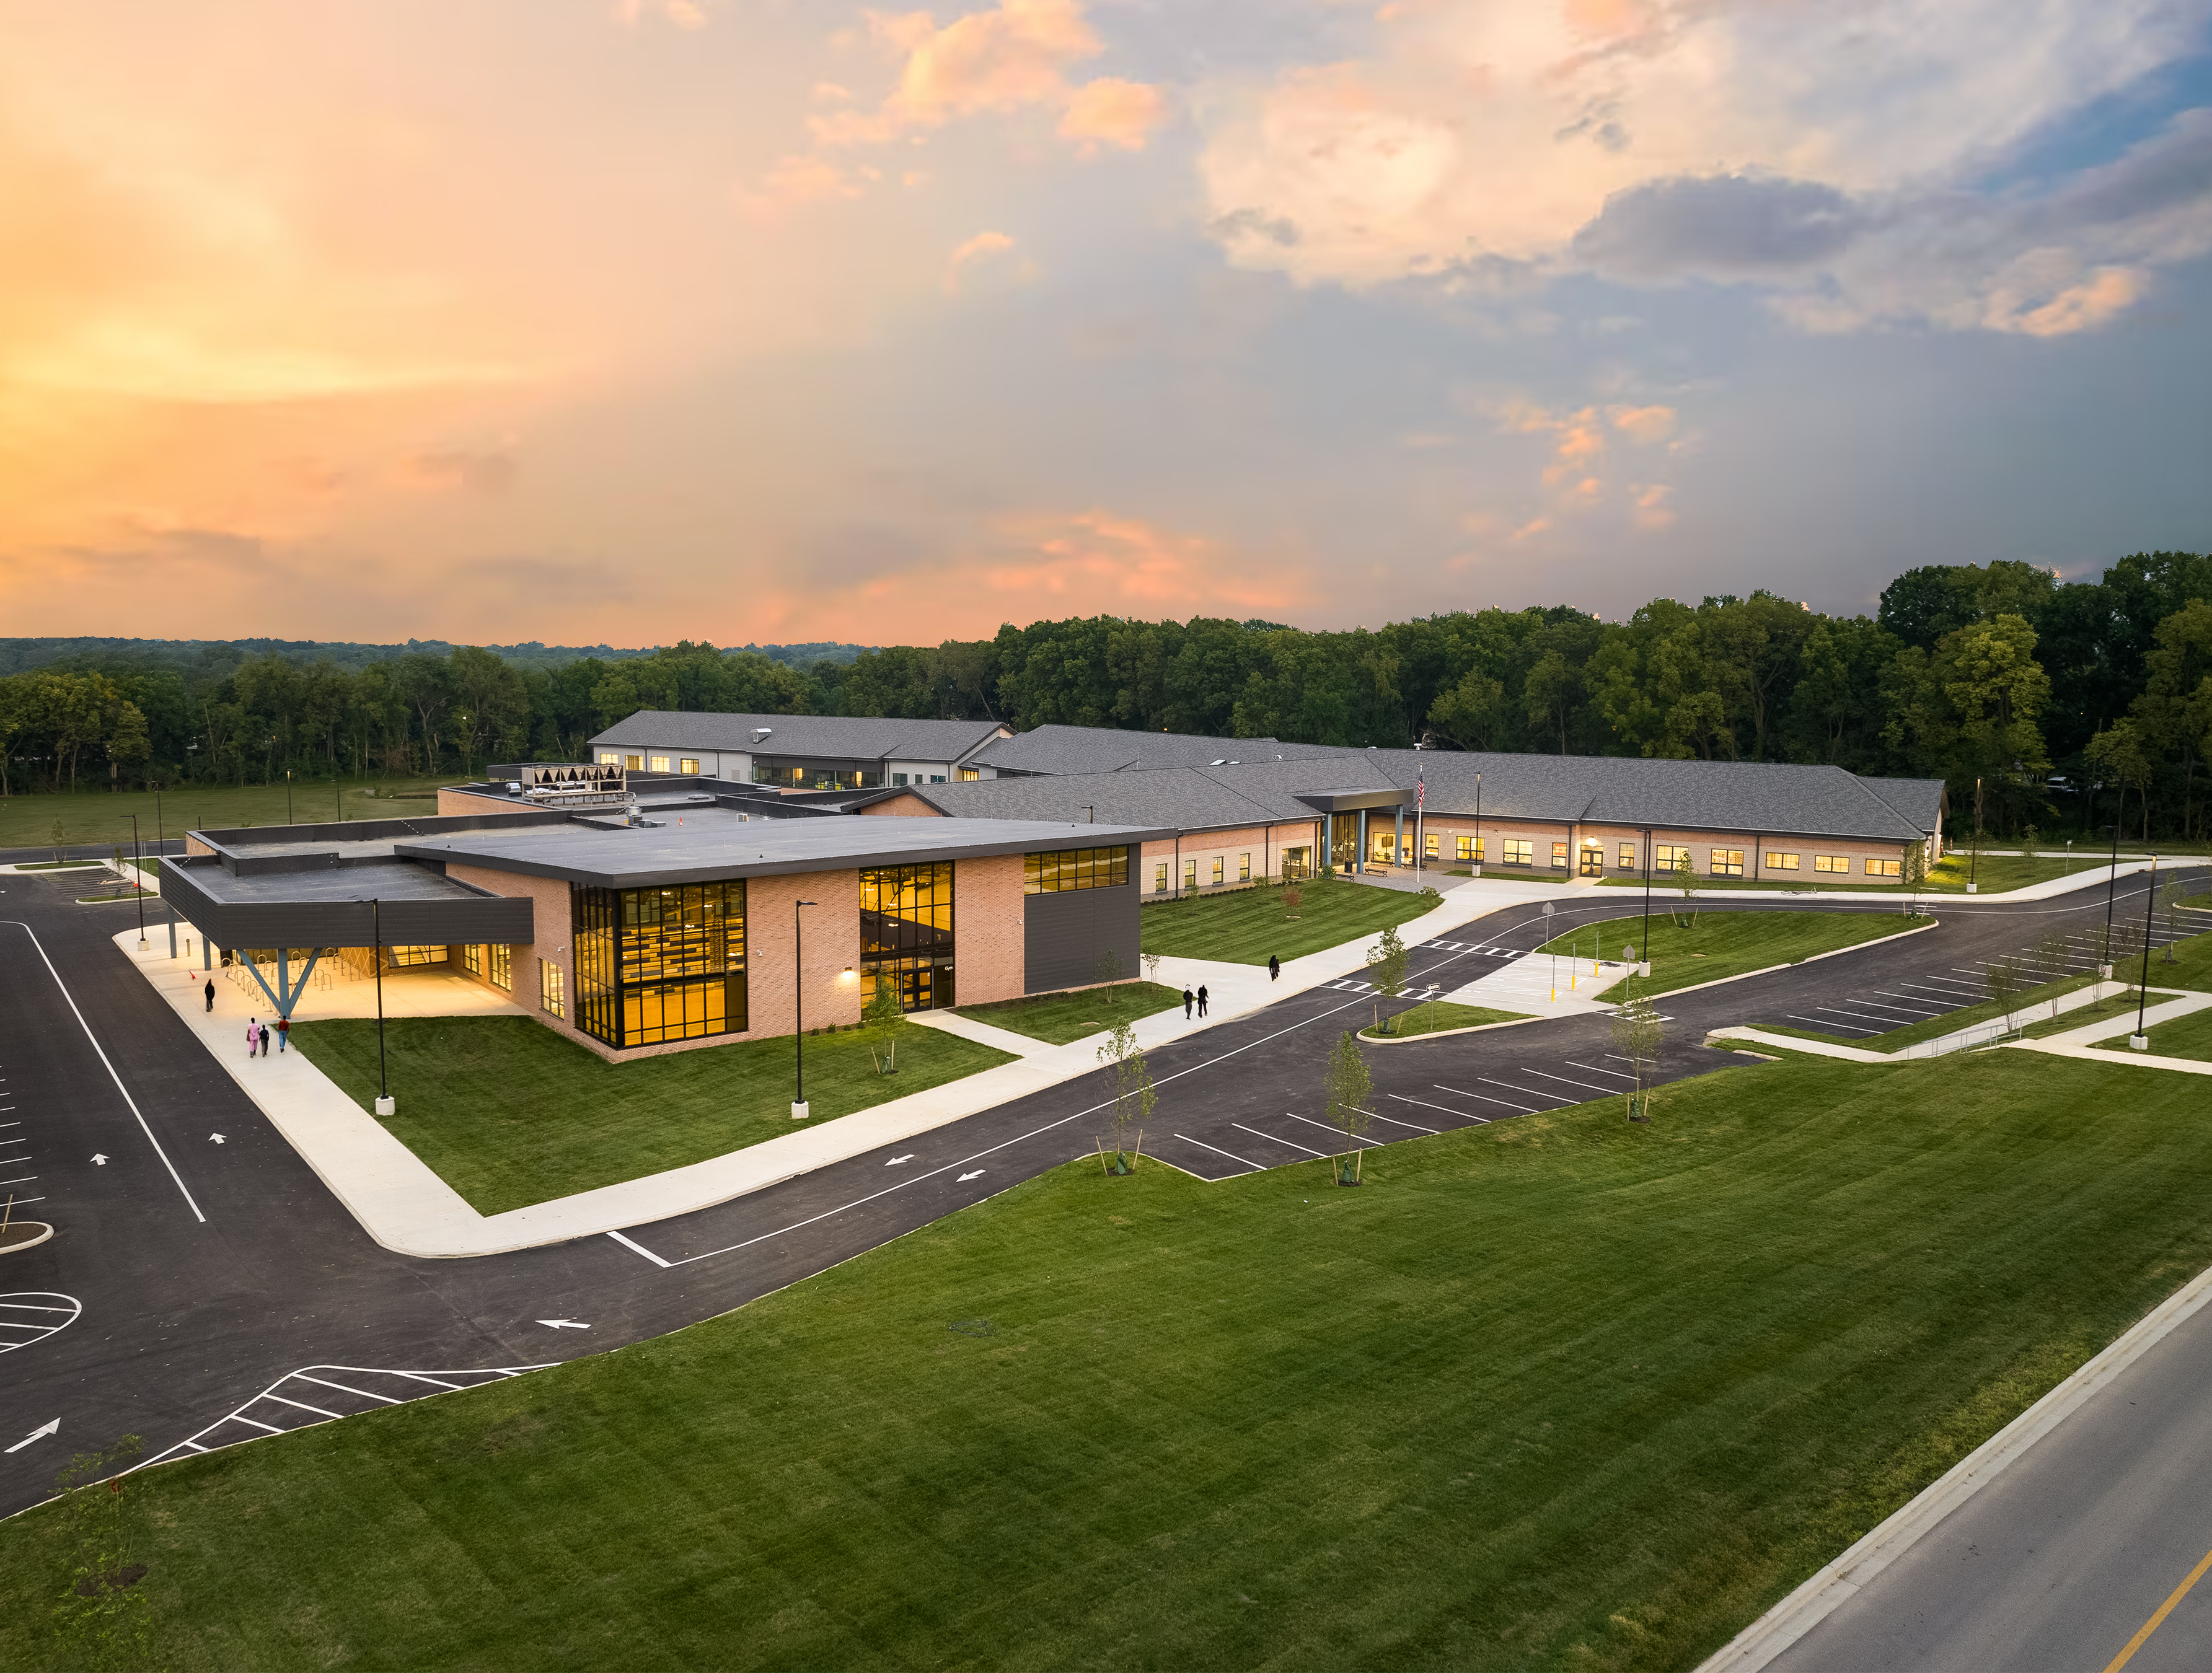 Minerva Park Middle School: A Beacon of Unity and Resilience in Design